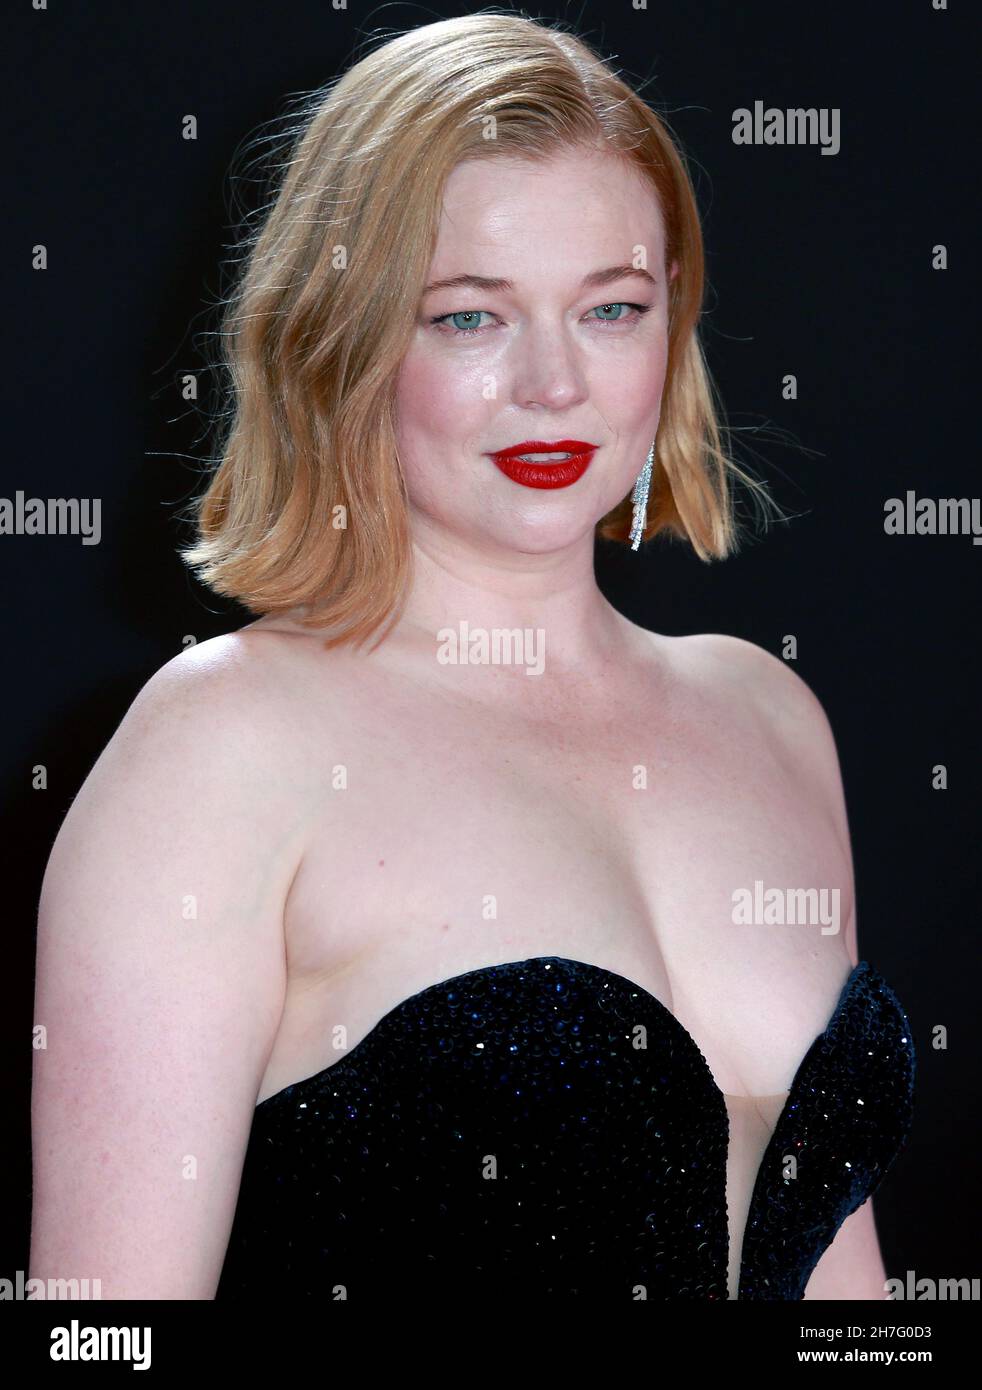 LONDON, UNITED KINGDOM - Oct 15, 2021: Sarah Snook  attends European premiere of season 3 of 'Succession' at the Royal Festival Hall the London Film F Stock Photo